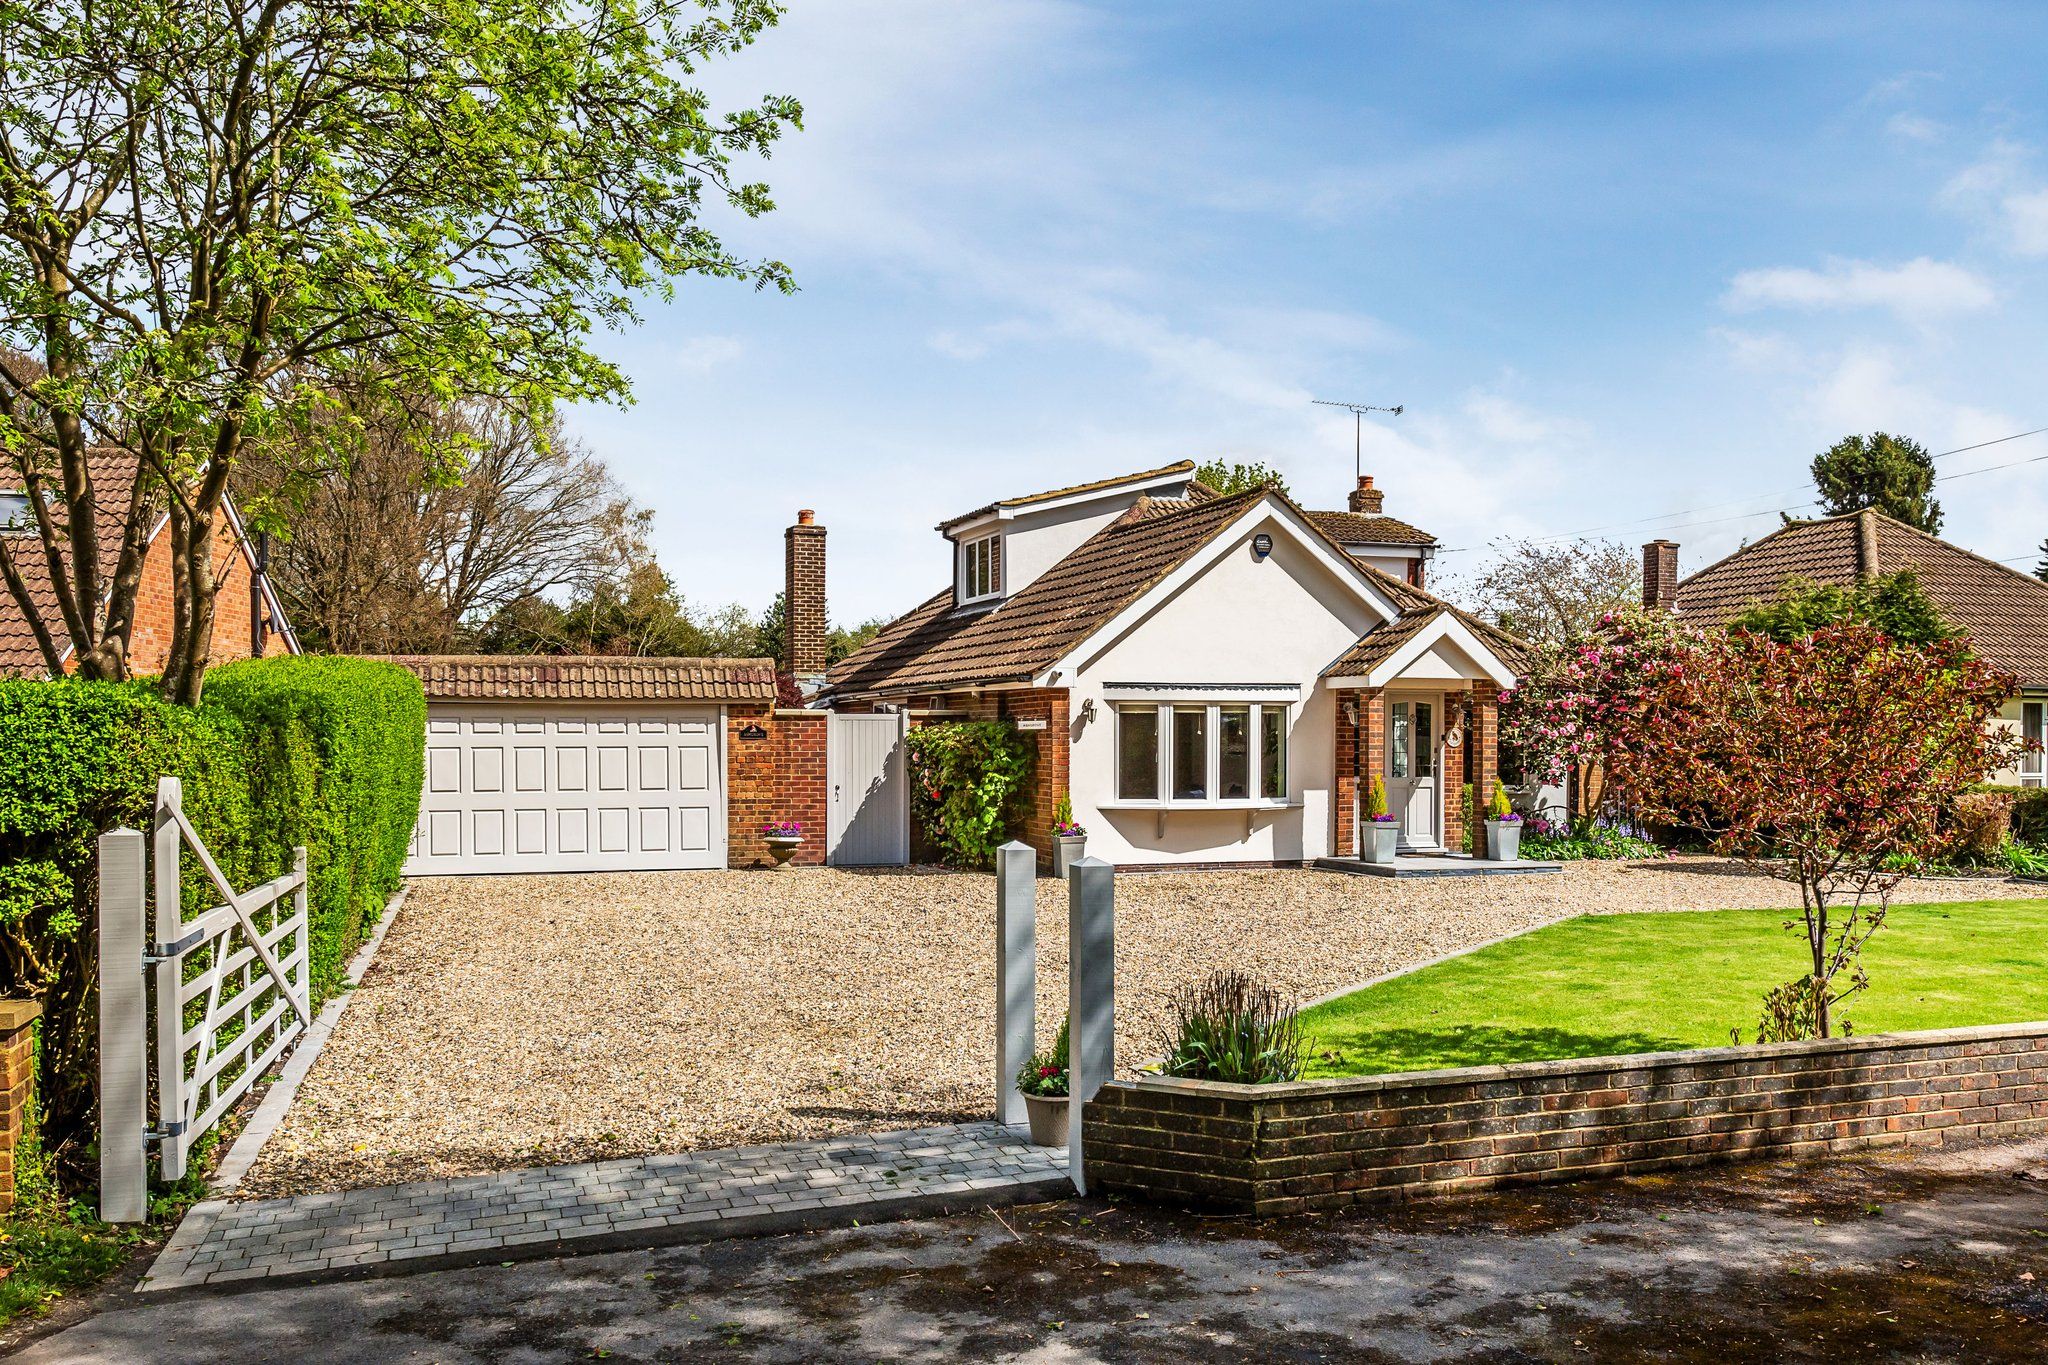 Luxted Road, Downe, Orpington, Kent, BR6 7JX